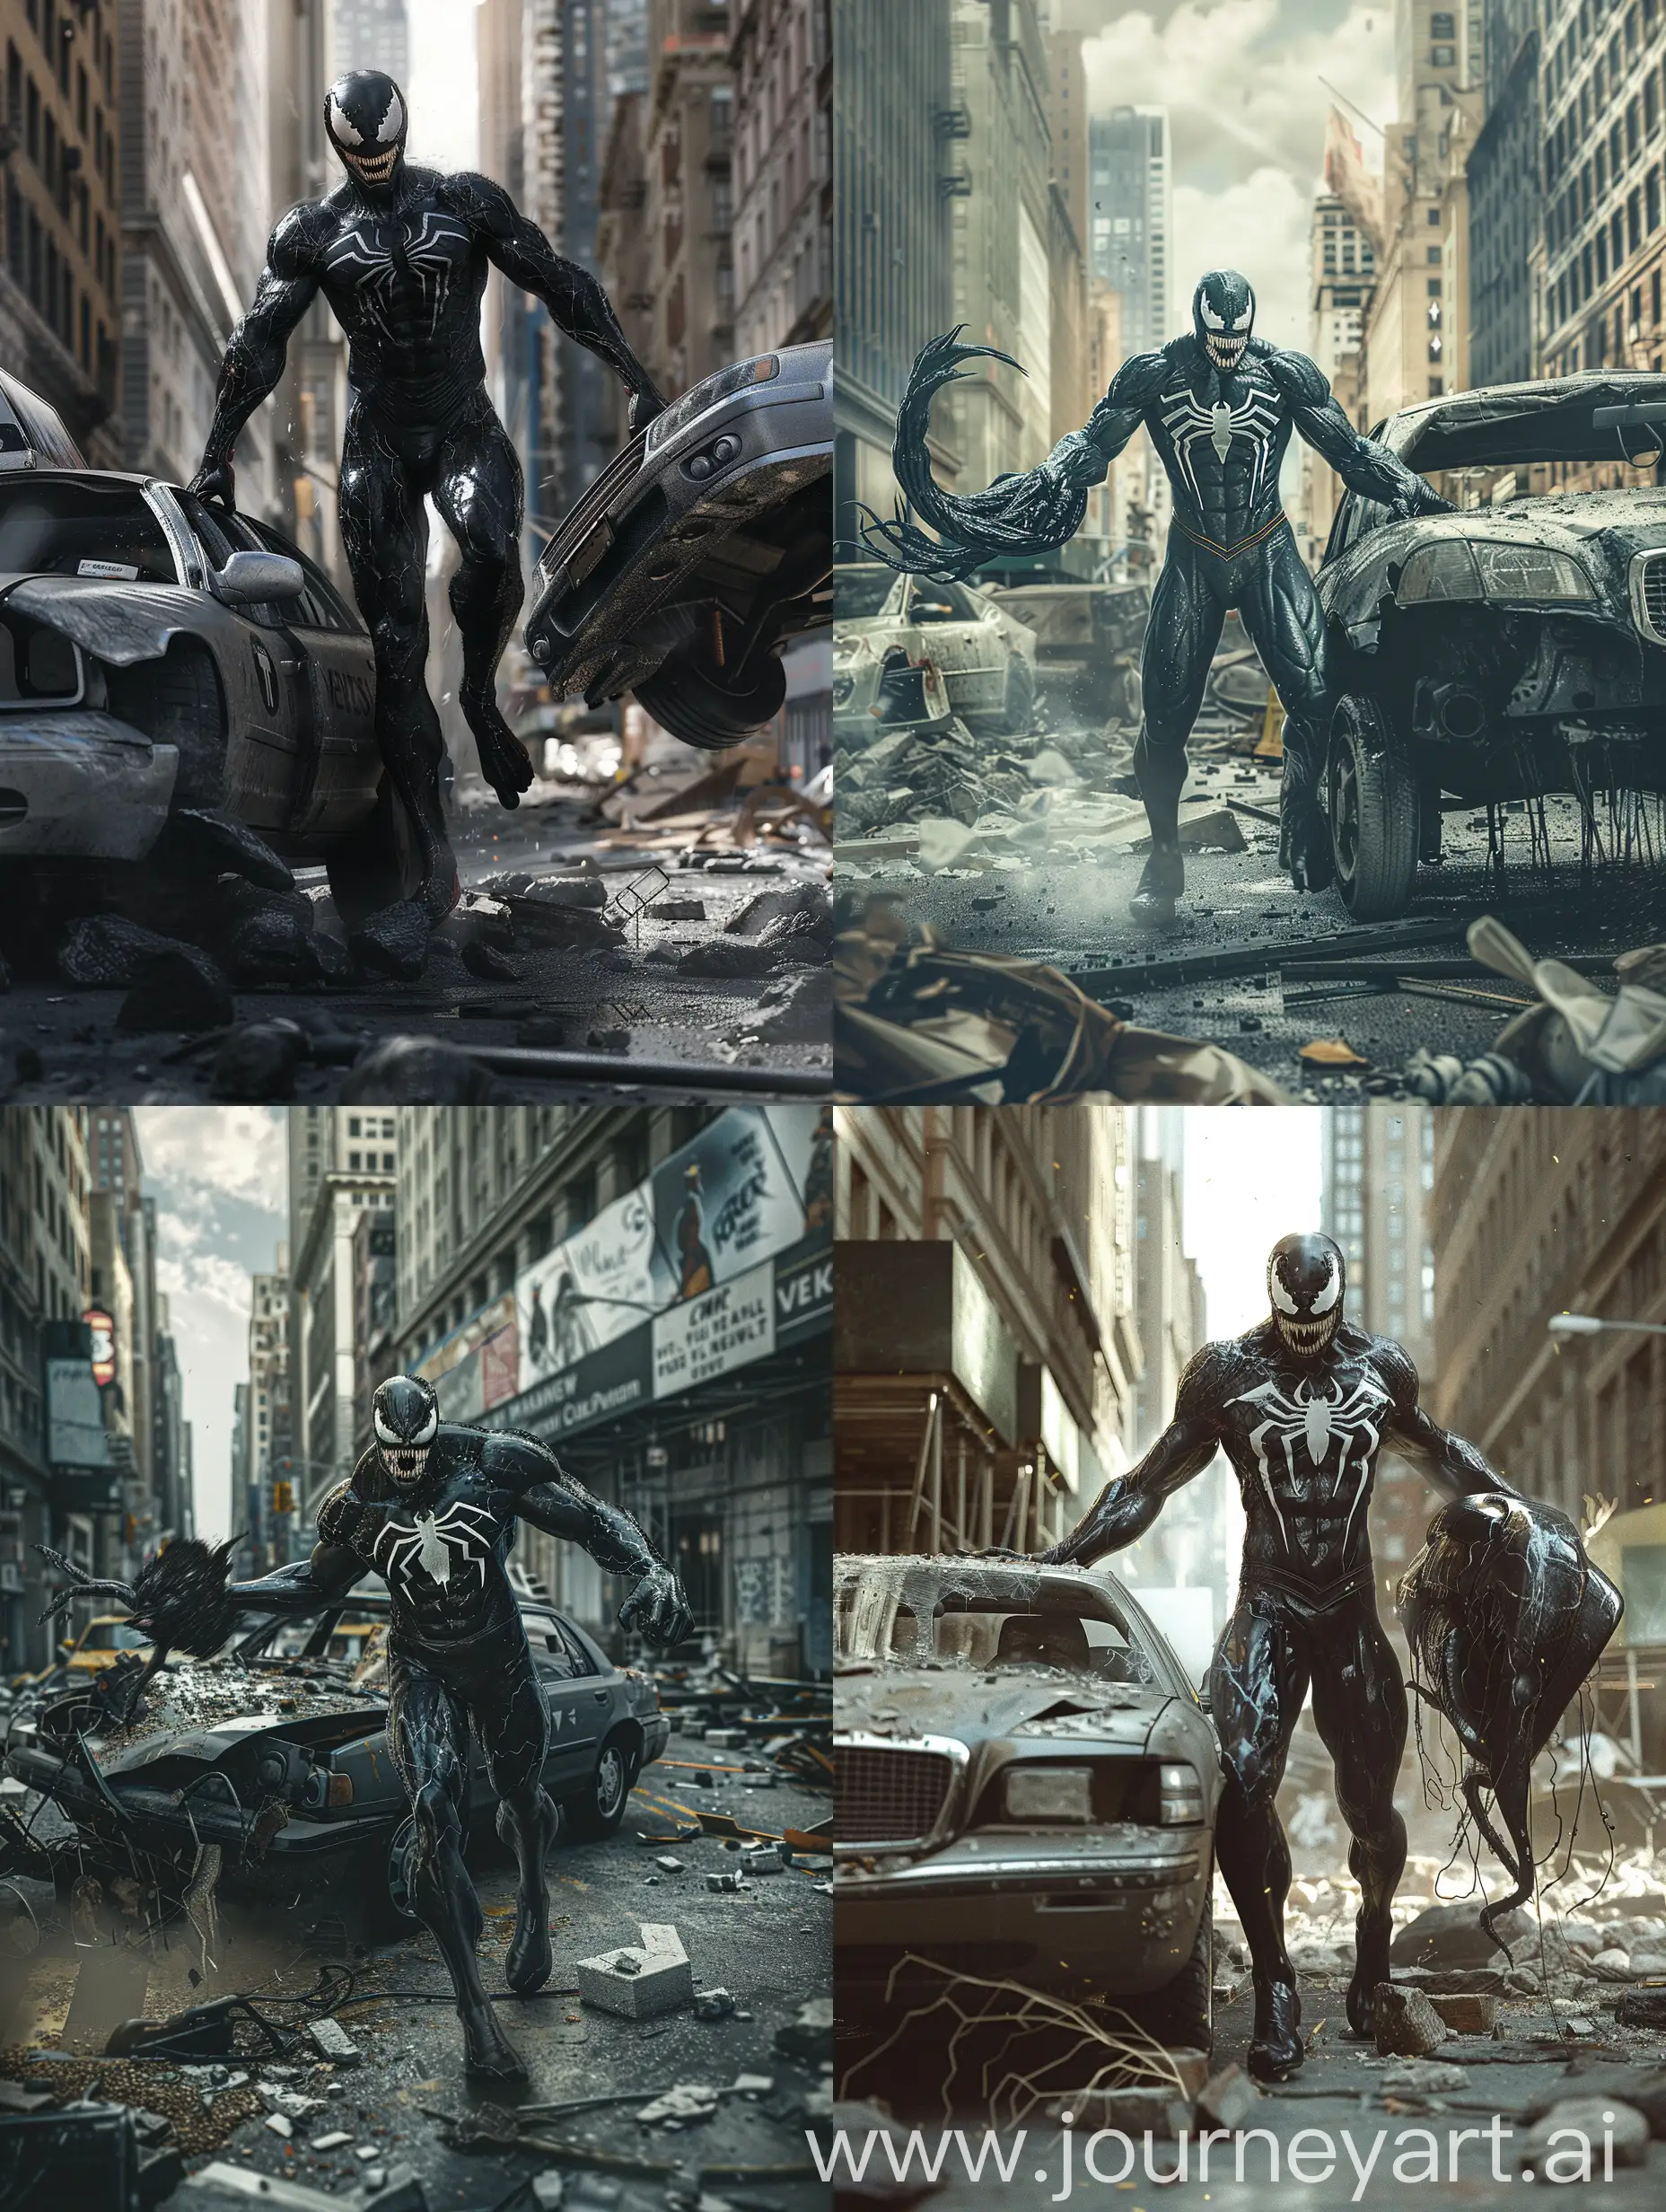 Spider-Man NWH as venom walking through a destroyed New York City street in anger and aggressively. ((FULL BODY IMAGE)) holding a heavy car and tossing it

